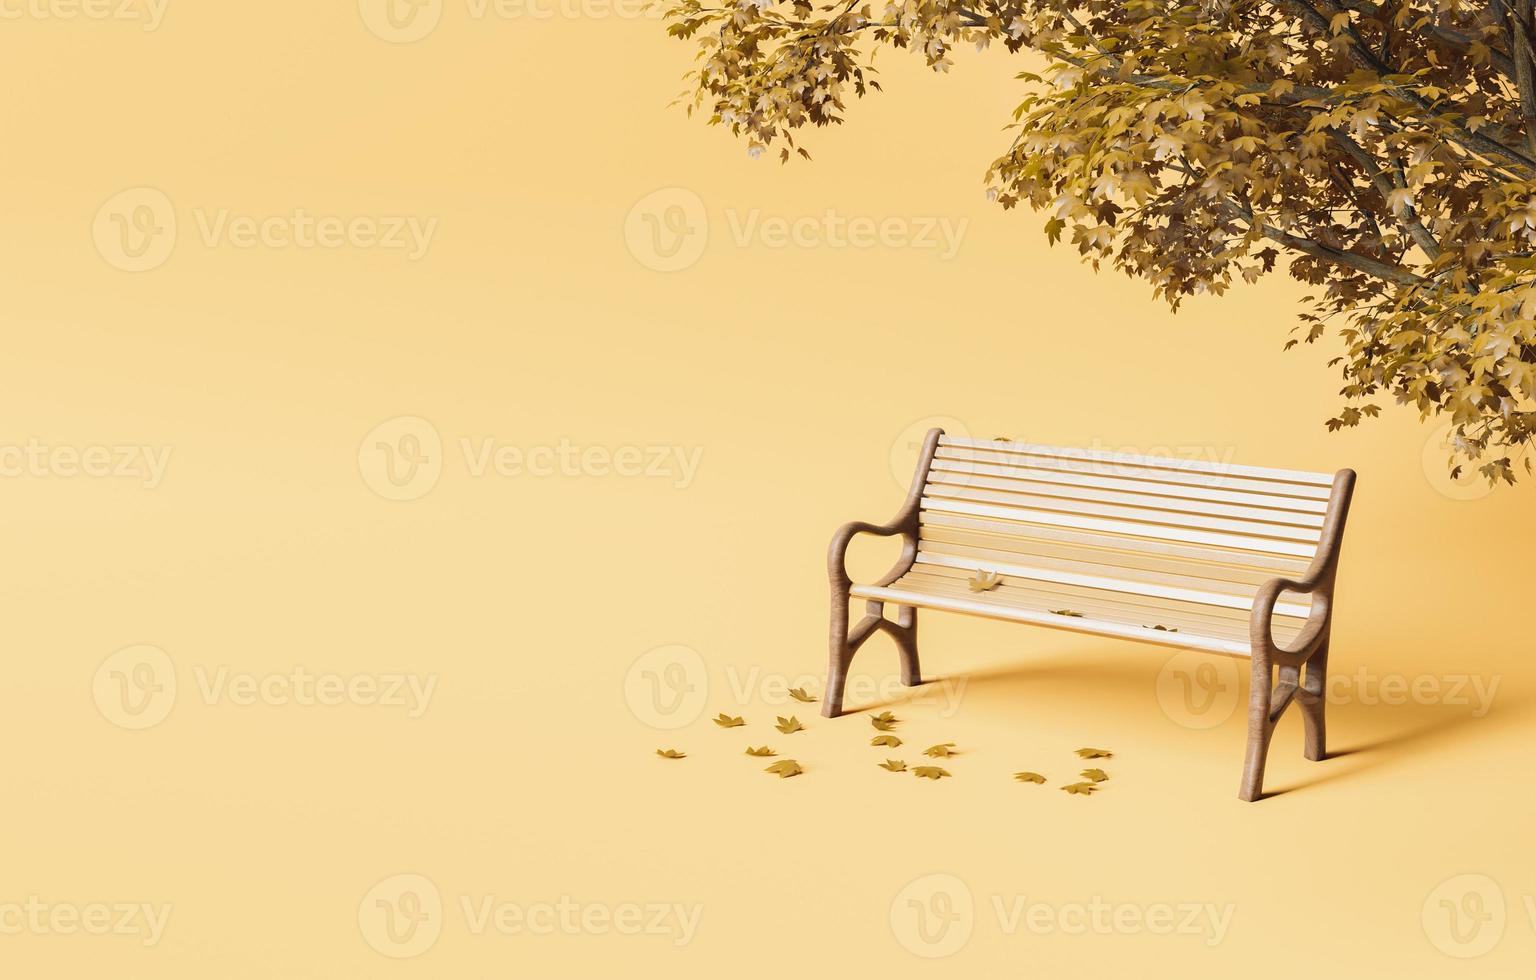 Minimalistic park bench under autumn tree with fallen leaves photo